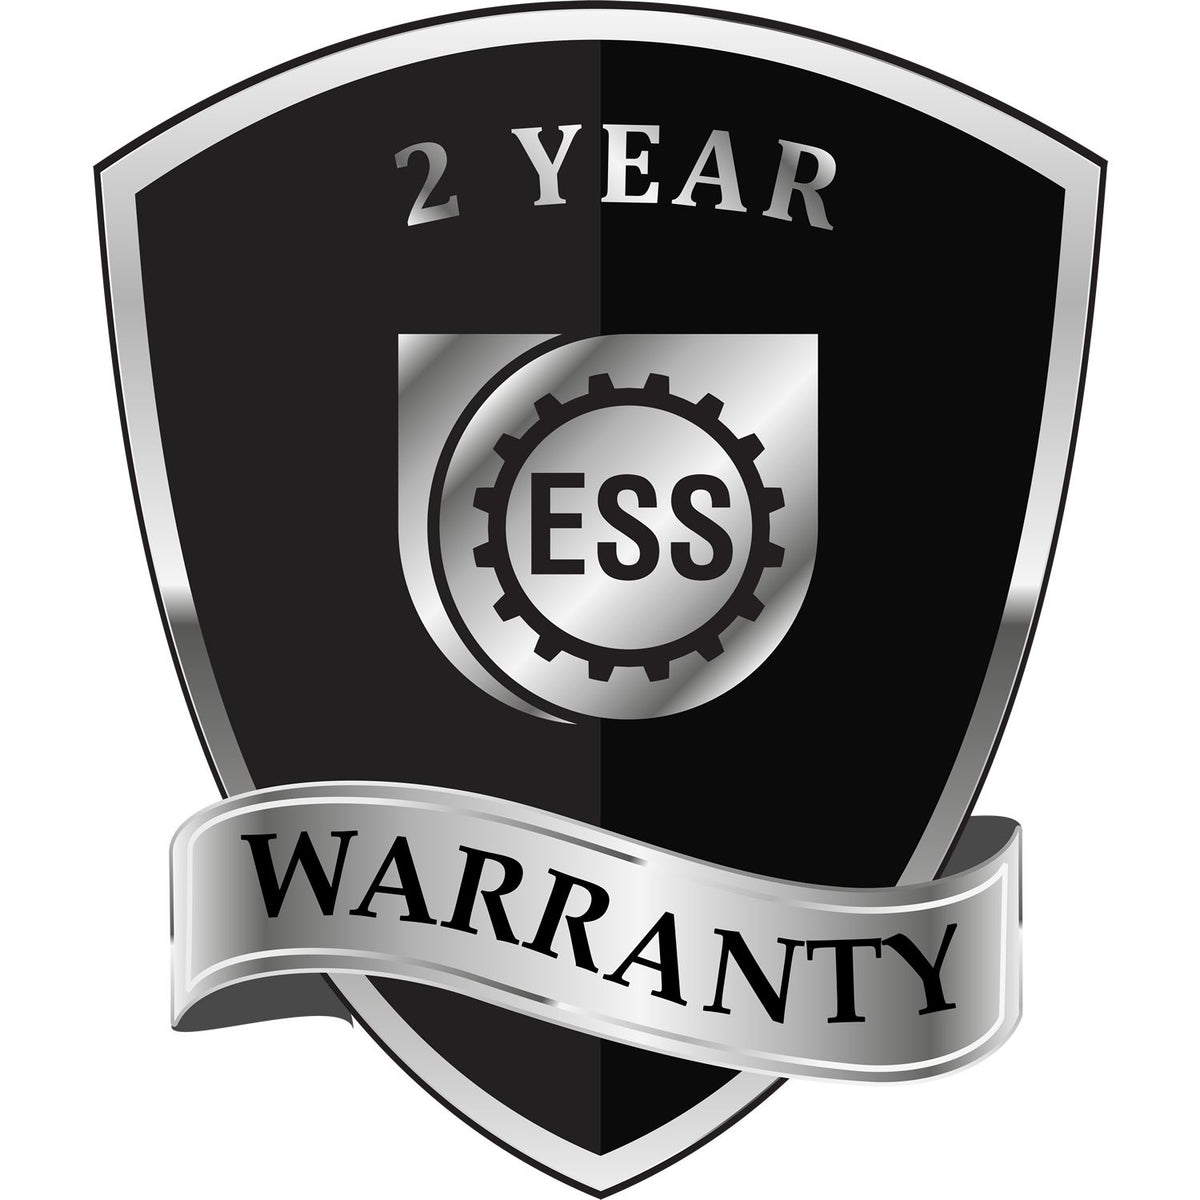 A black and silver badge or emblem showing warranty information for the Gift District of Columbia Geologist Seal